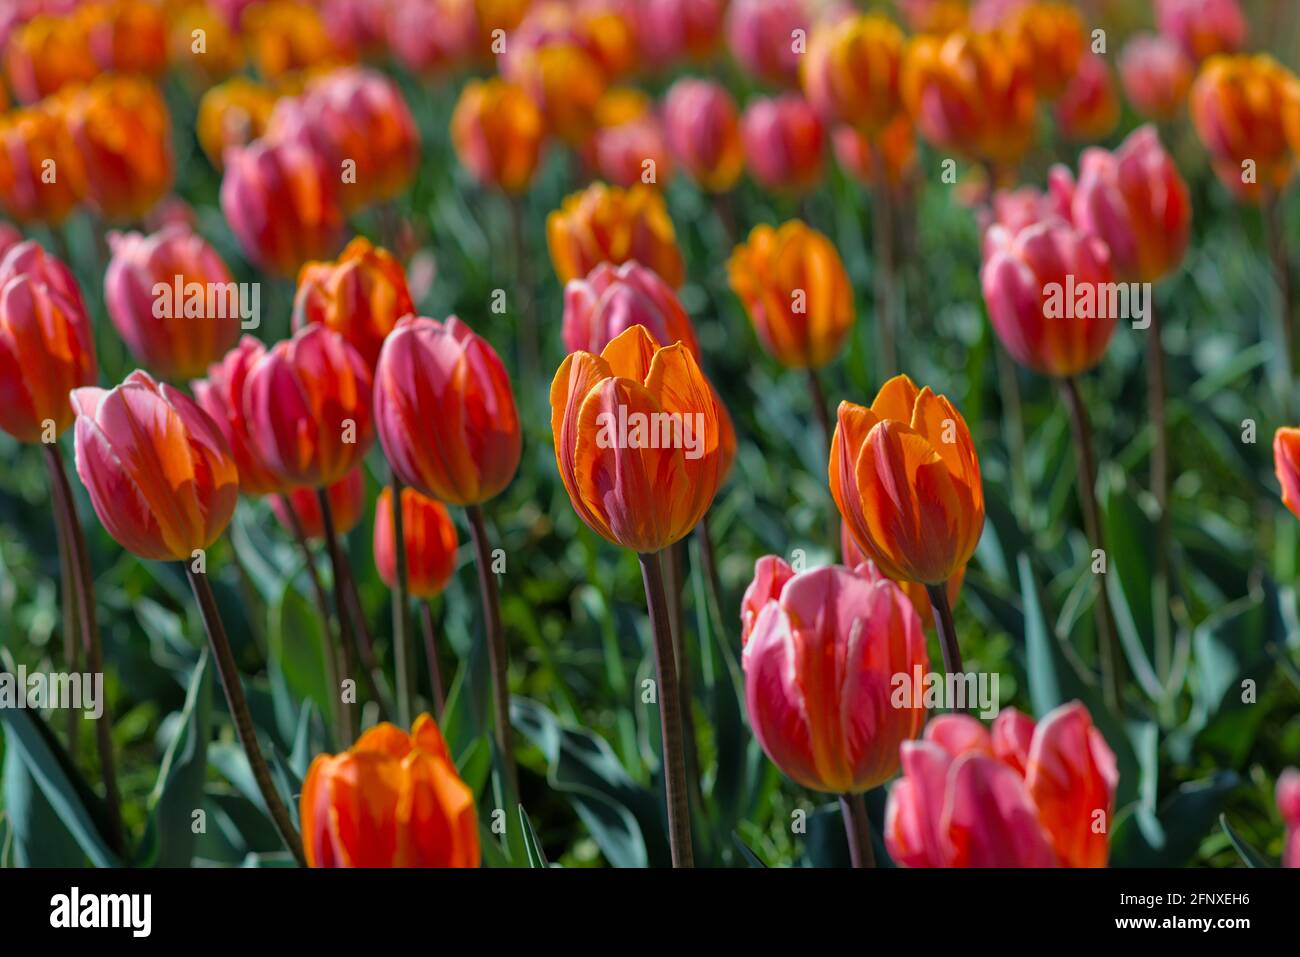 Wonderful orange and pink and red tulips (Princess Irene, Pretty Princess) at the Canadian Tulip Festival 2021 in Ottawa, Ontario, Canada. Stock Photo